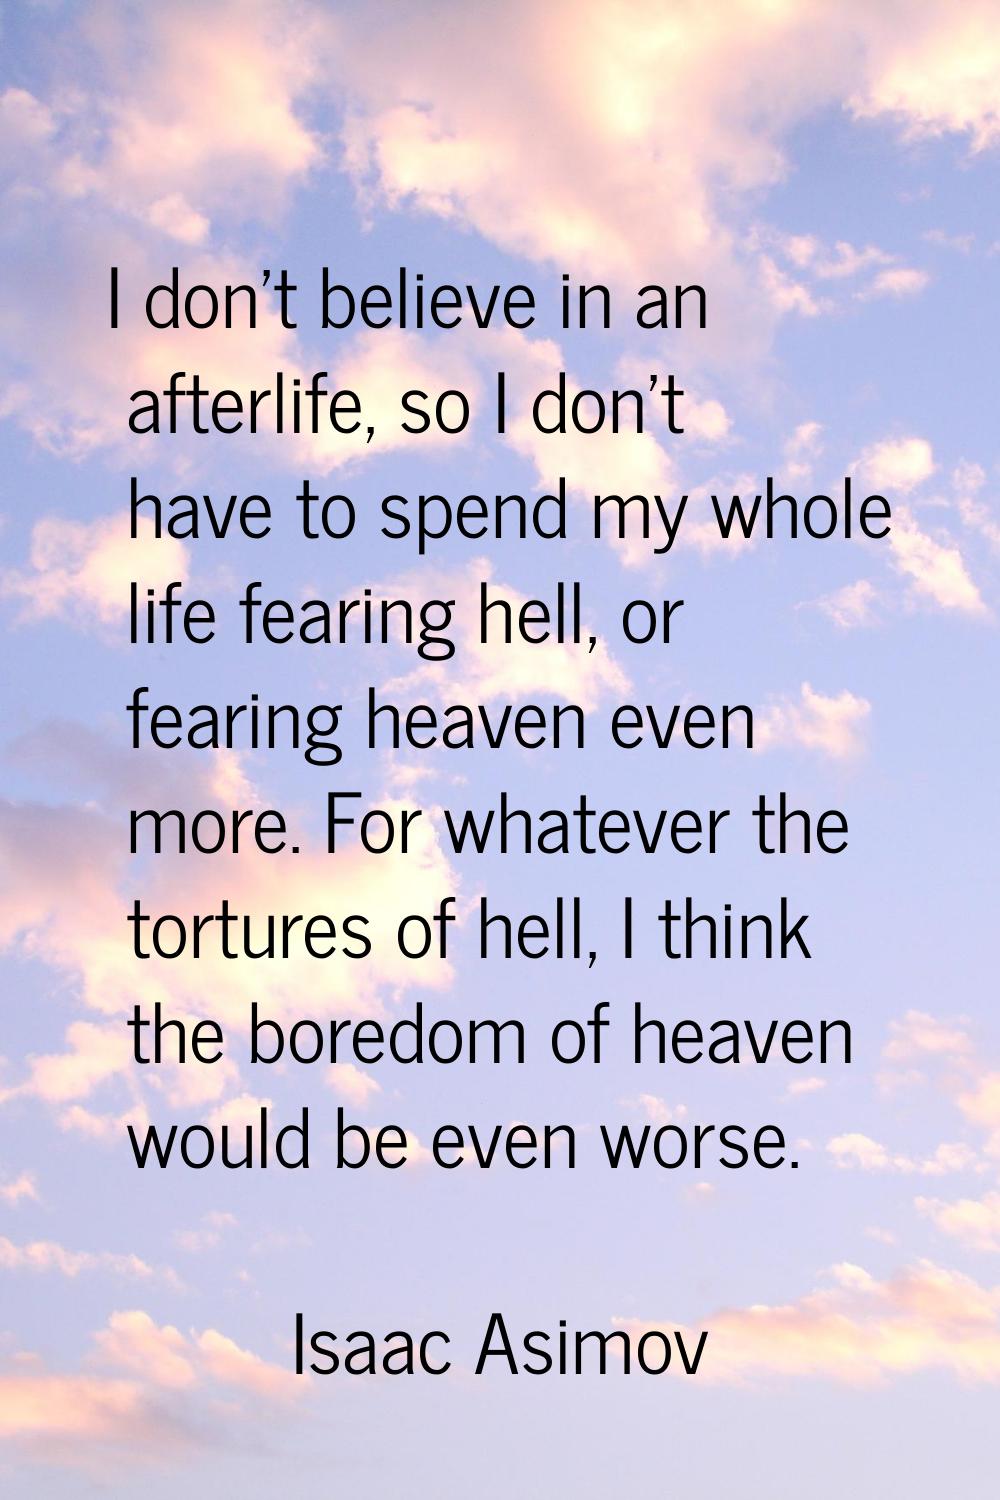 I don't believe in an afterlife, so I don't have to spend my whole life fearing hell, or fearing he